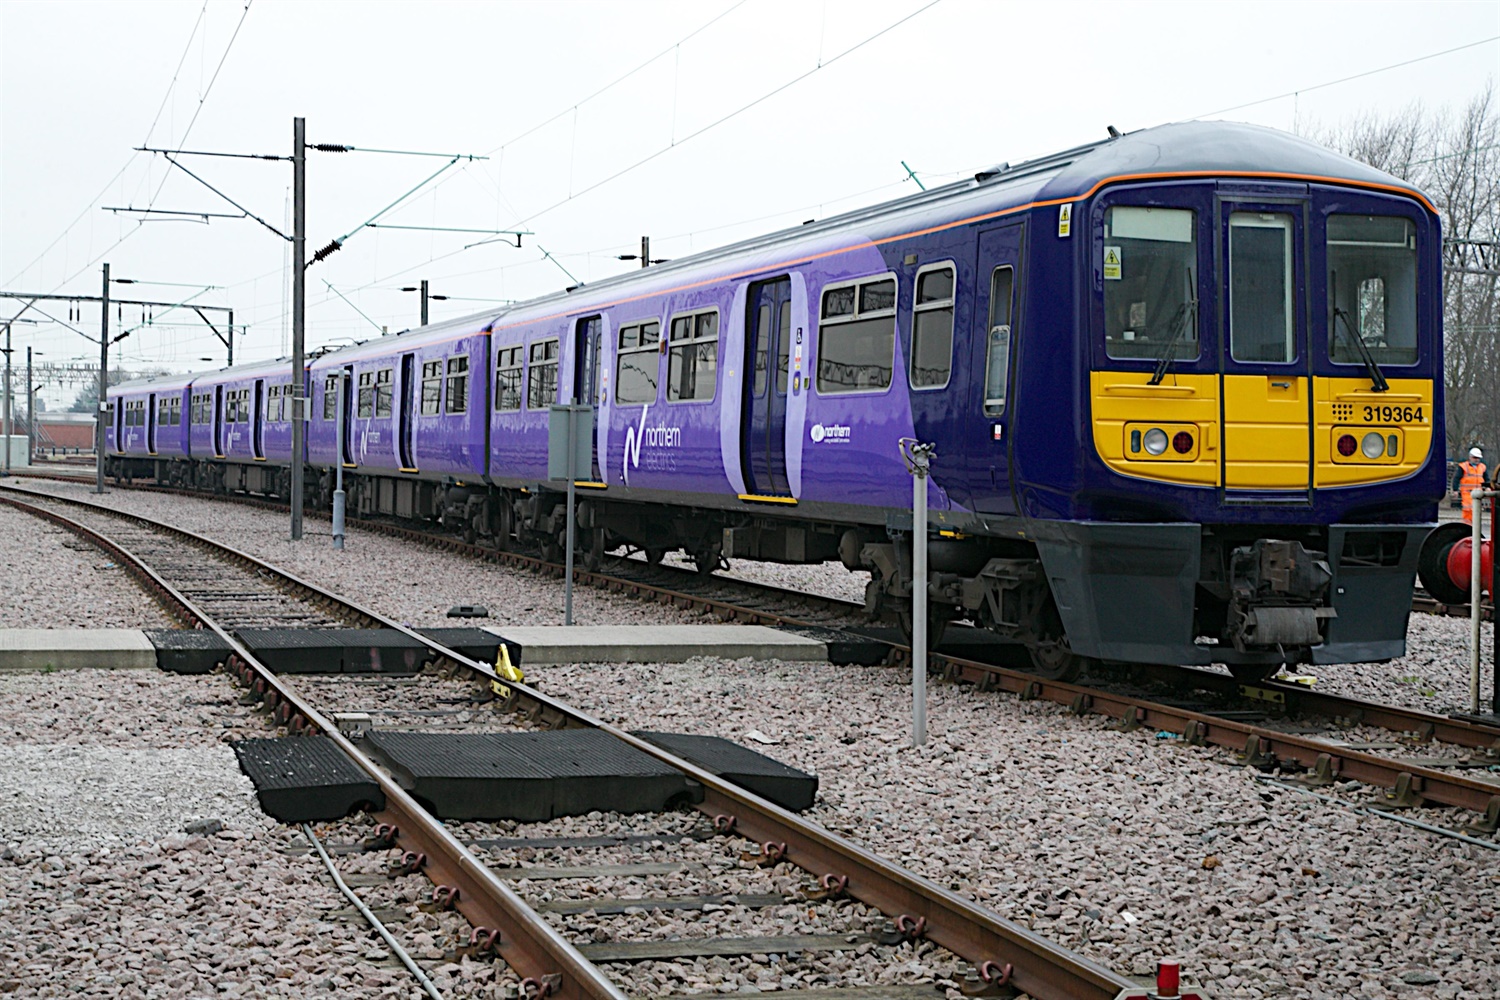 Northern Rail plans to start running electric services next week